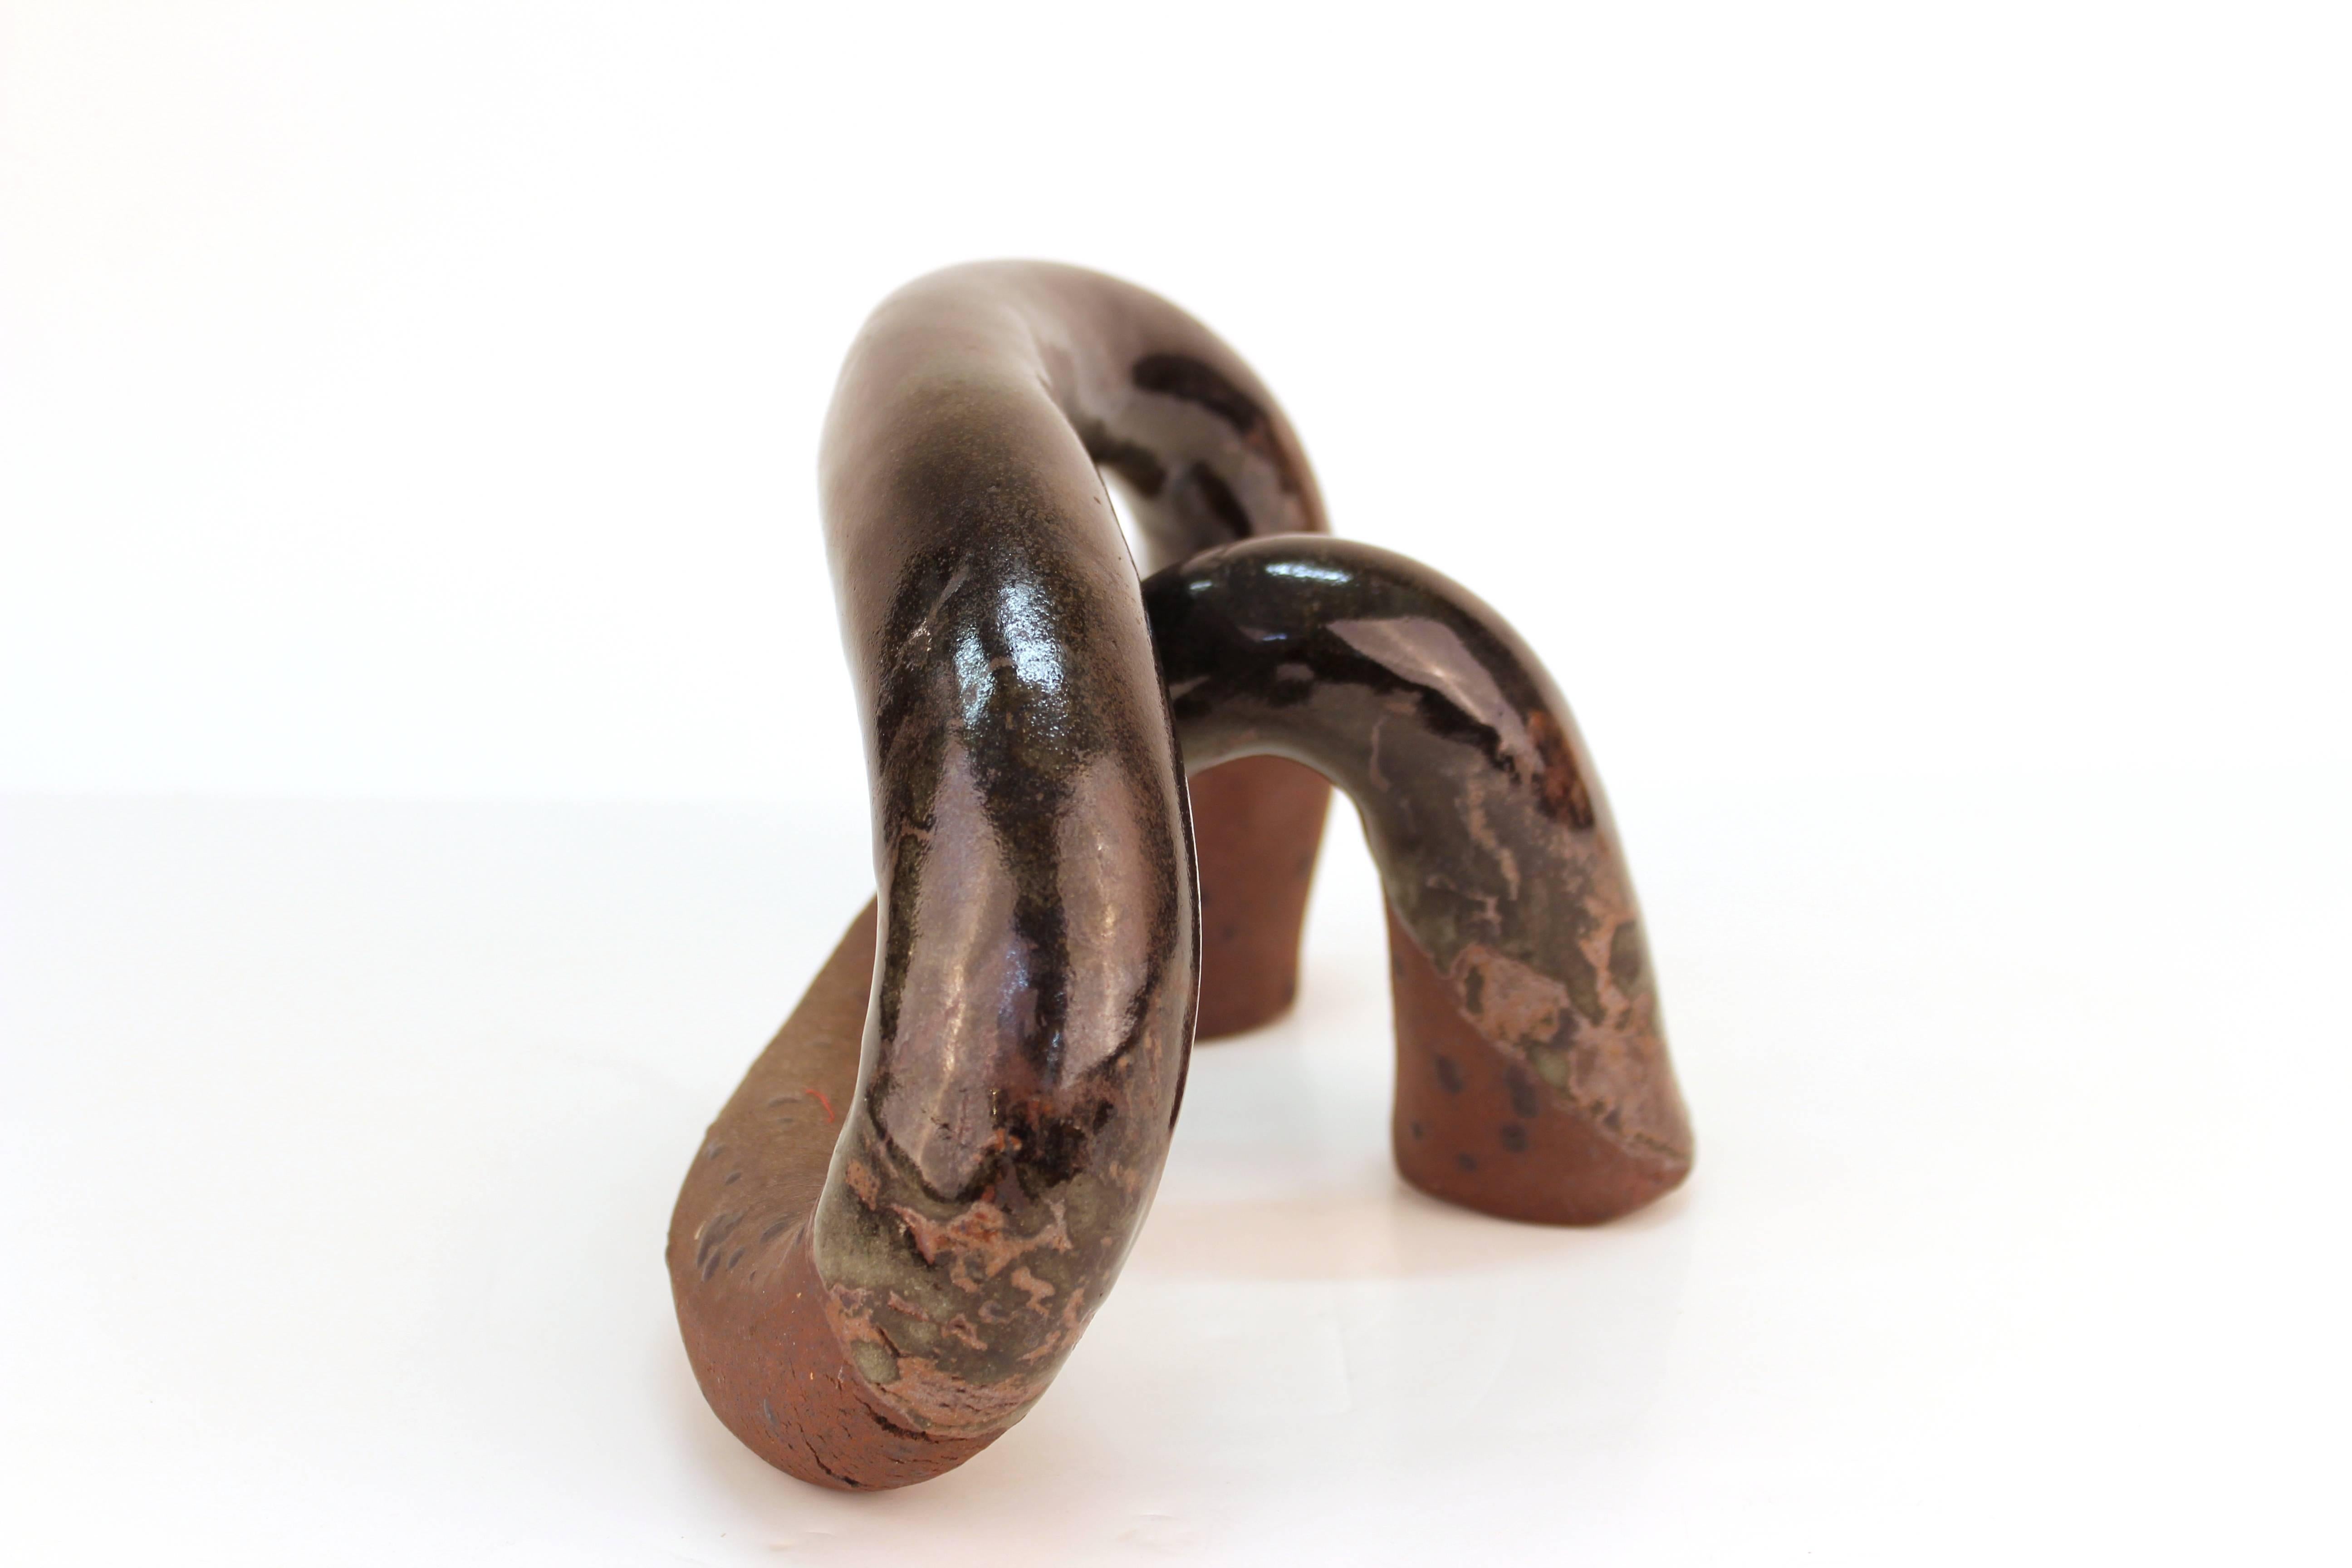 A Mid-century modern partly glazed black sculpture in an anthropomorphic shape. The piece has a mark on one if its feet and is in good vintage quality.